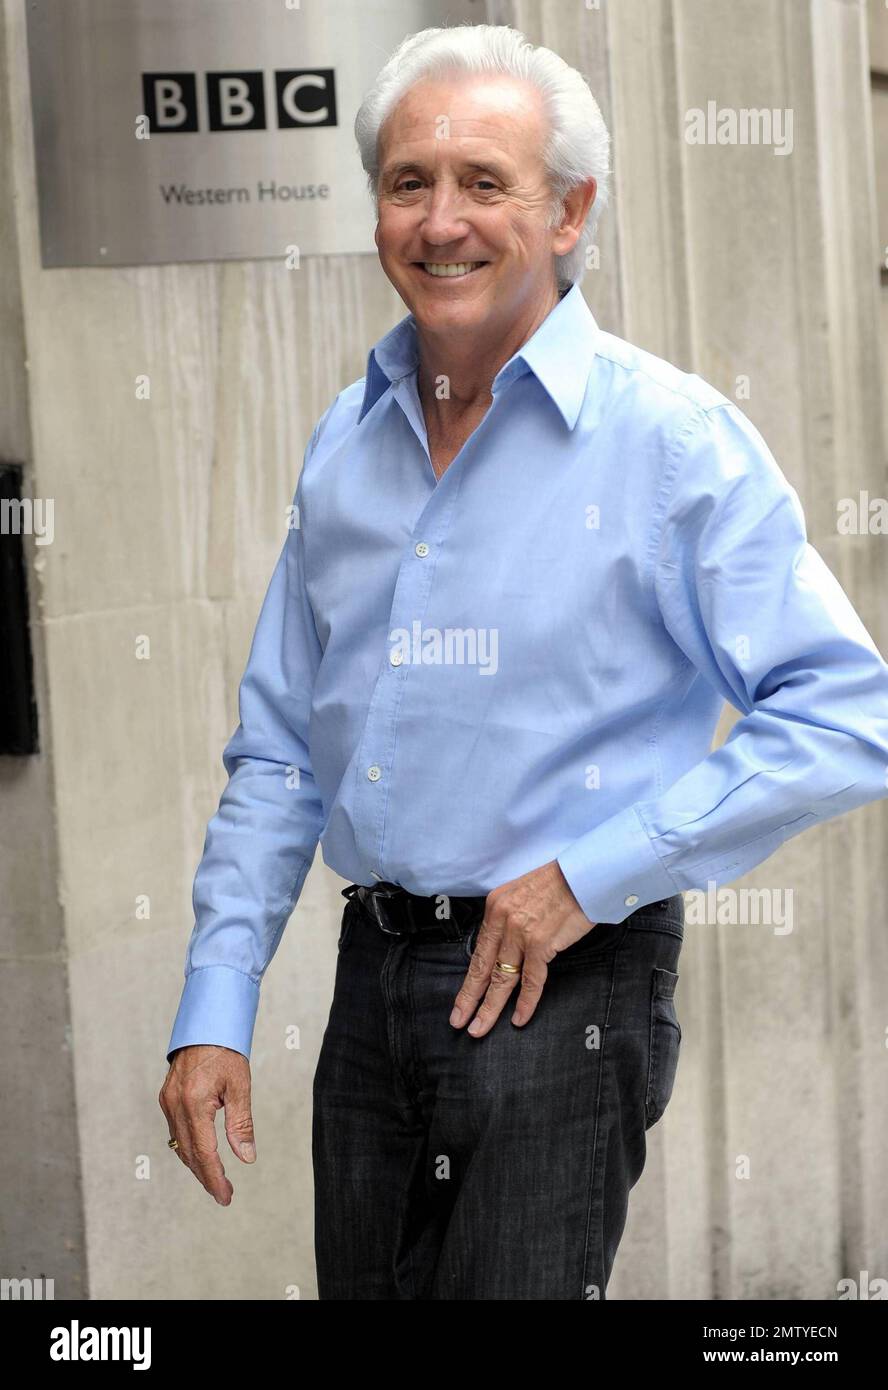 Singer Tony Christie is all smiles as he poses for photos while arriving at BBC Radio 2 for an appearance. London, UK. 7/7/10. Stock Photo